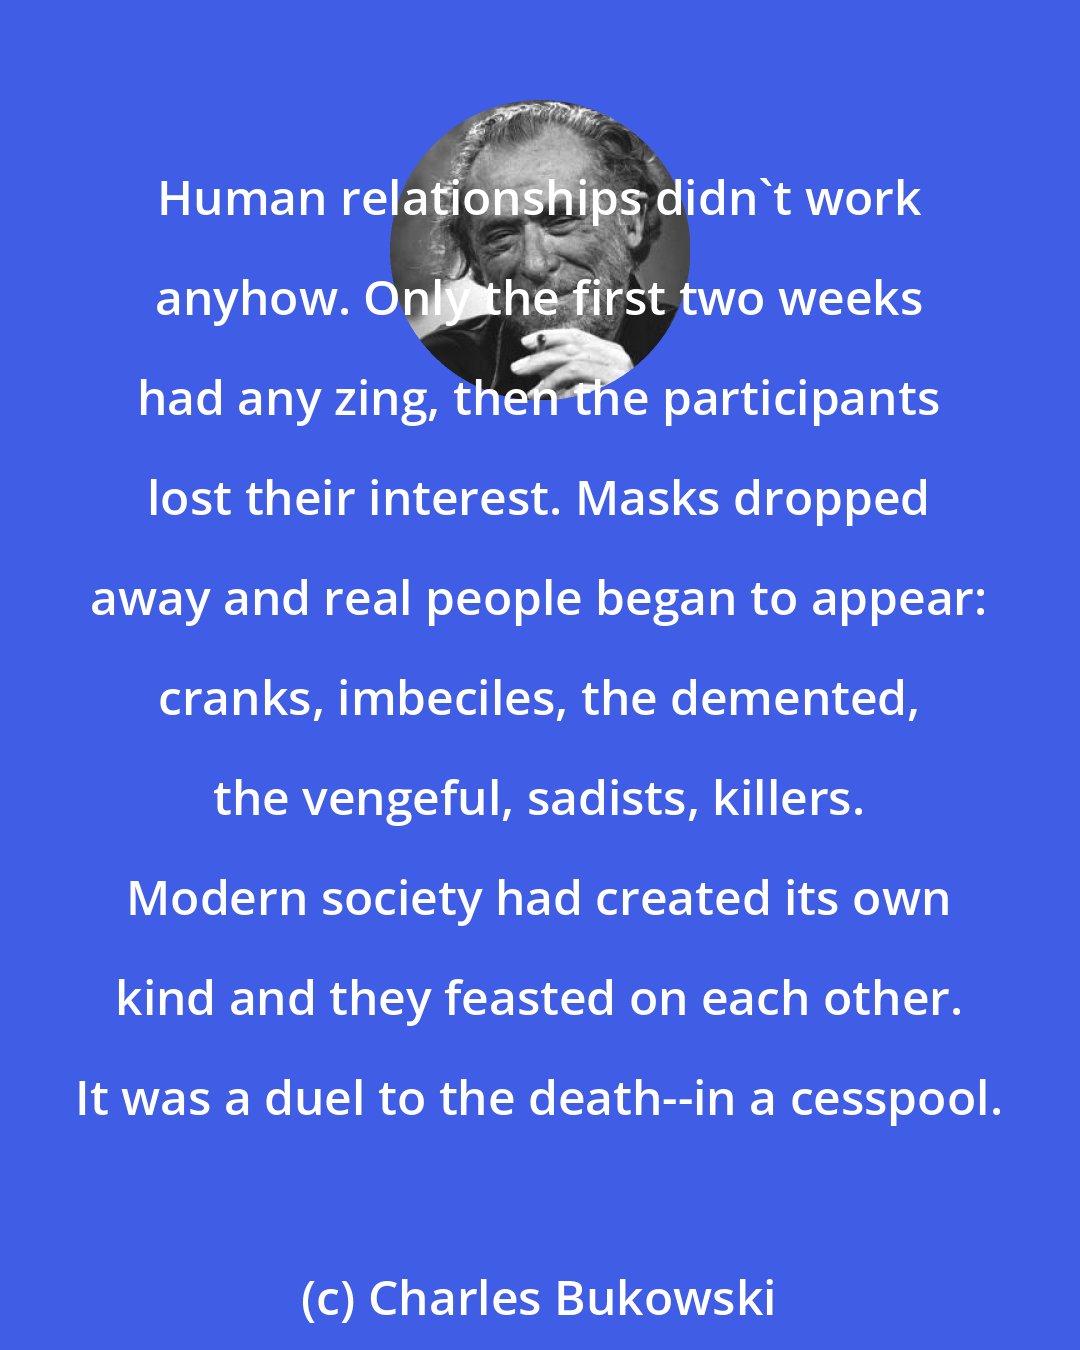 Charles Bukowski: Human relationships didn't work anyhow. Only the first two weeks had any zing, then the participants lost their interest. Masks dropped away and real people began to appear: cranks, imbeciles, the demented, the vengeful, sadists, killers. Modern society had created its own kind and they feasted on each other. It was a duel to the death--in a cesspool.